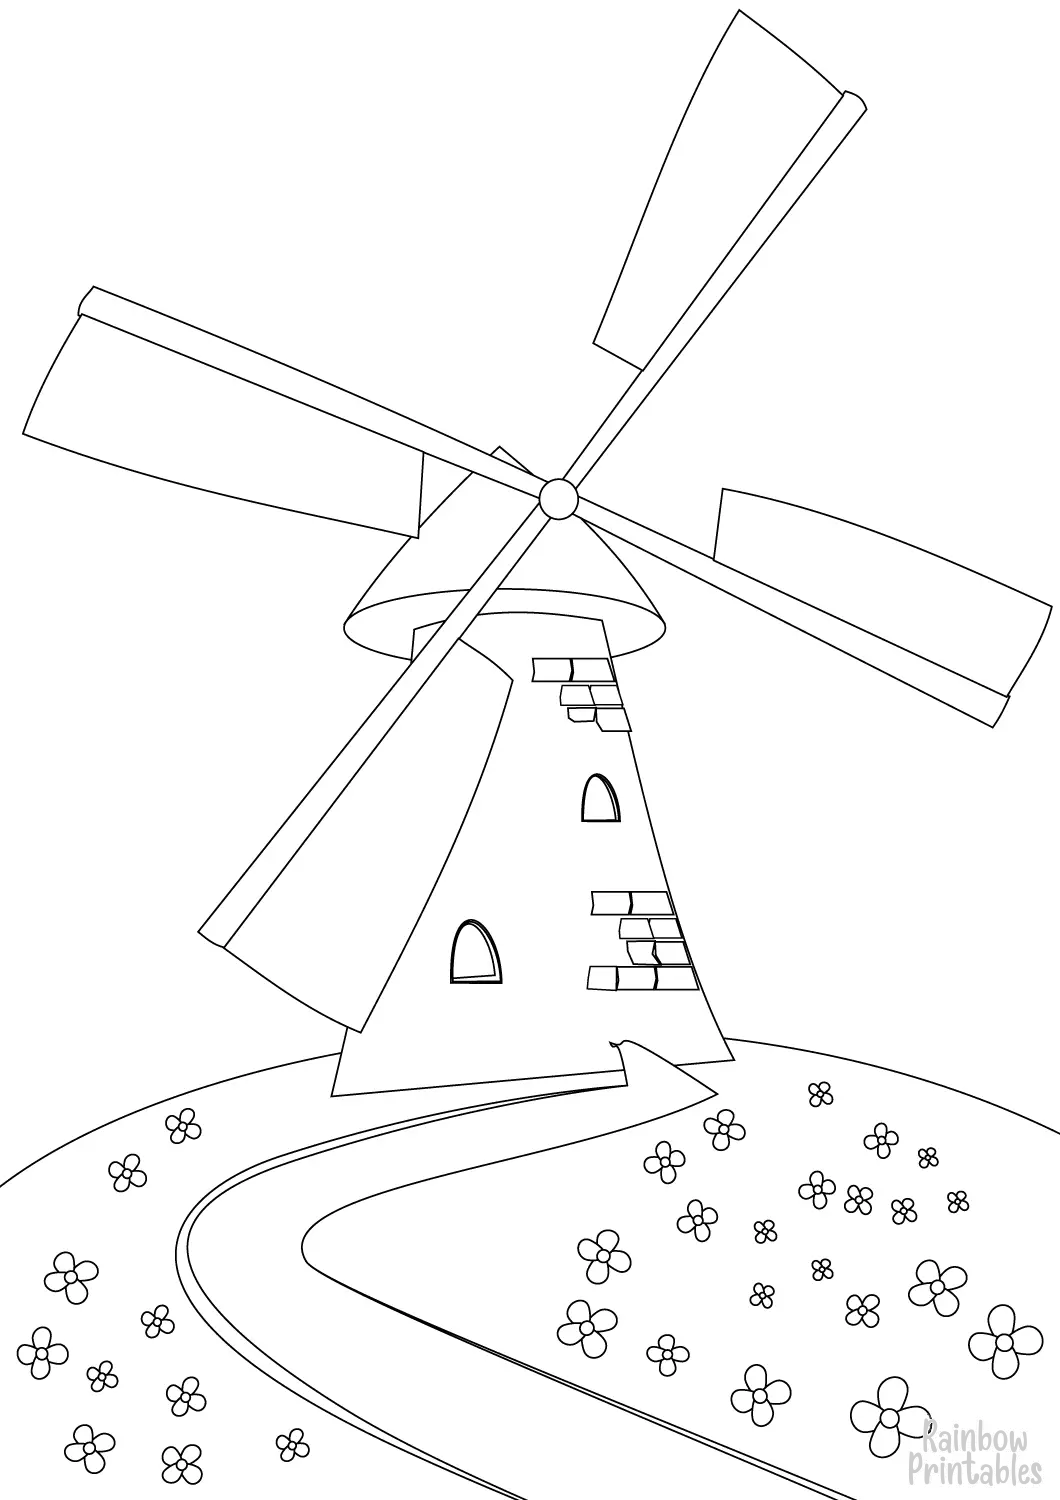 Simple Easy Line Drawing For Kids Tower Mill Windmill on a Hill Coloring Page for Children